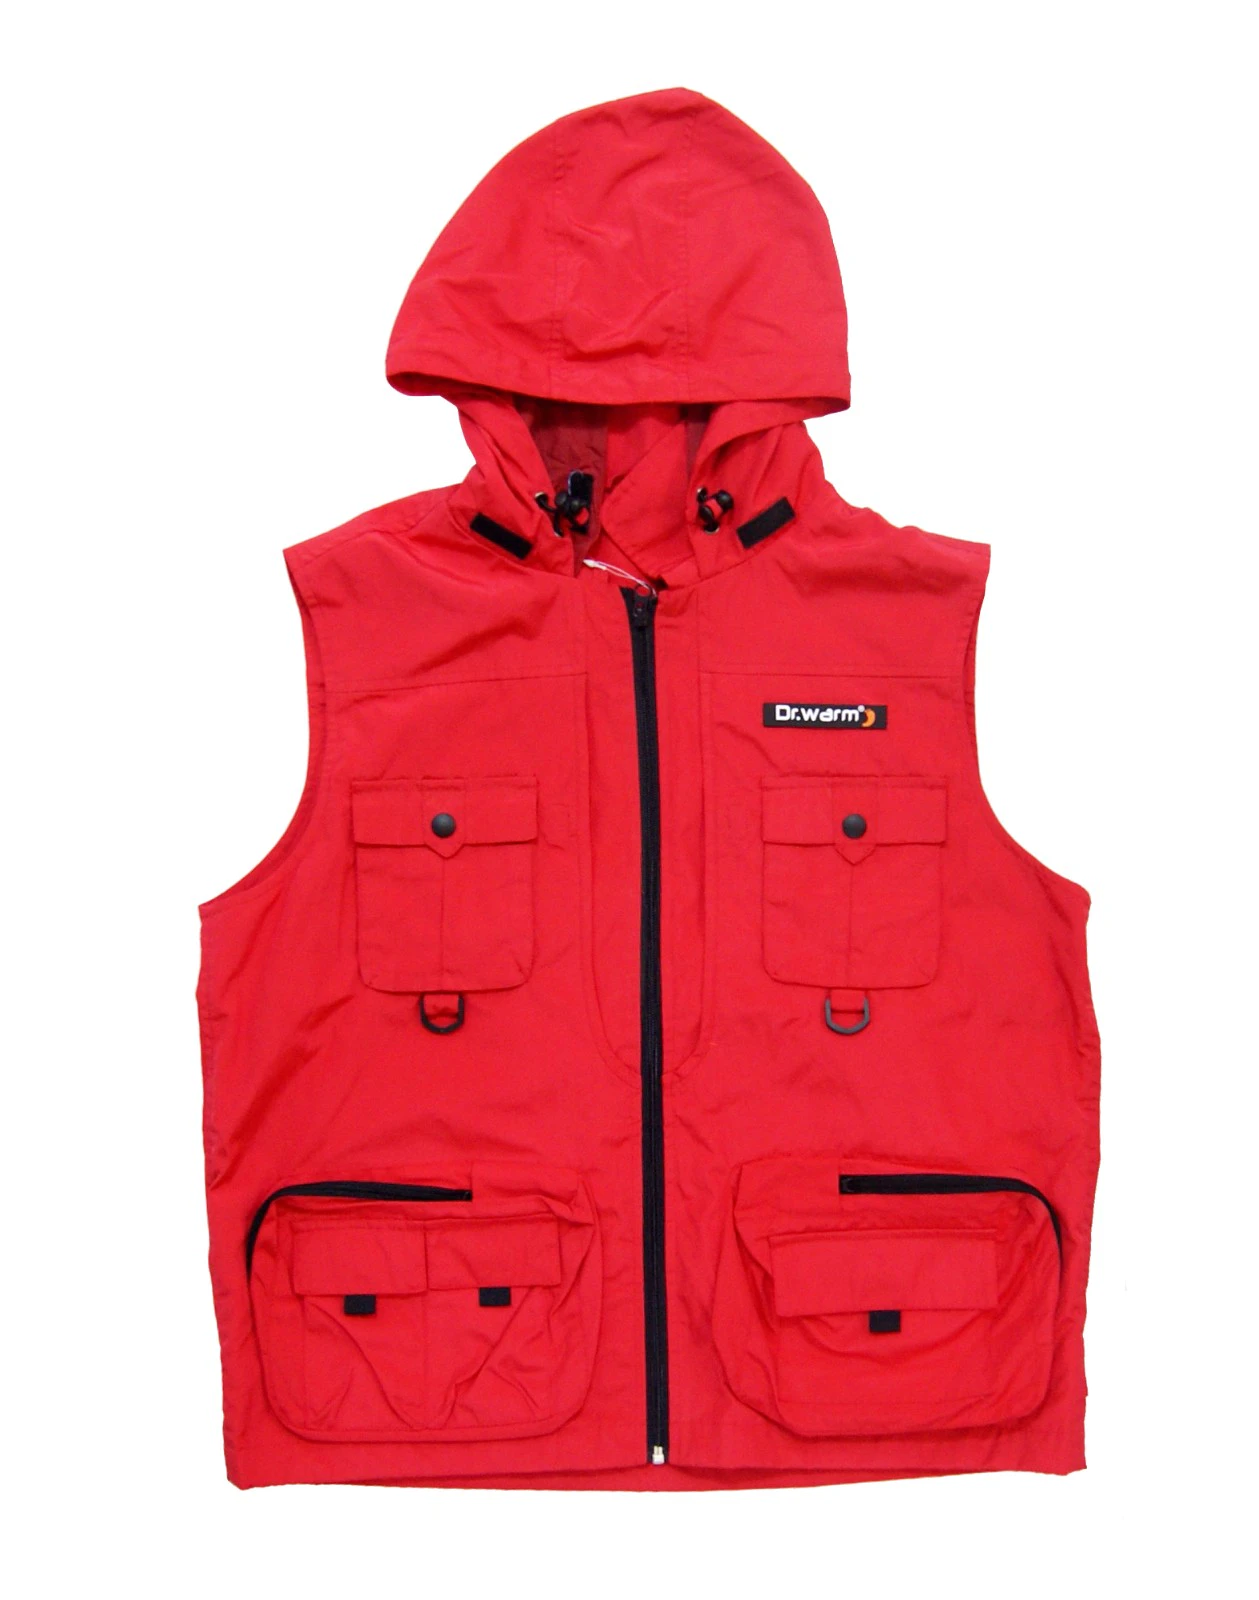 Dr. Warm healthy heated vest mens with prined pattern for outdoor